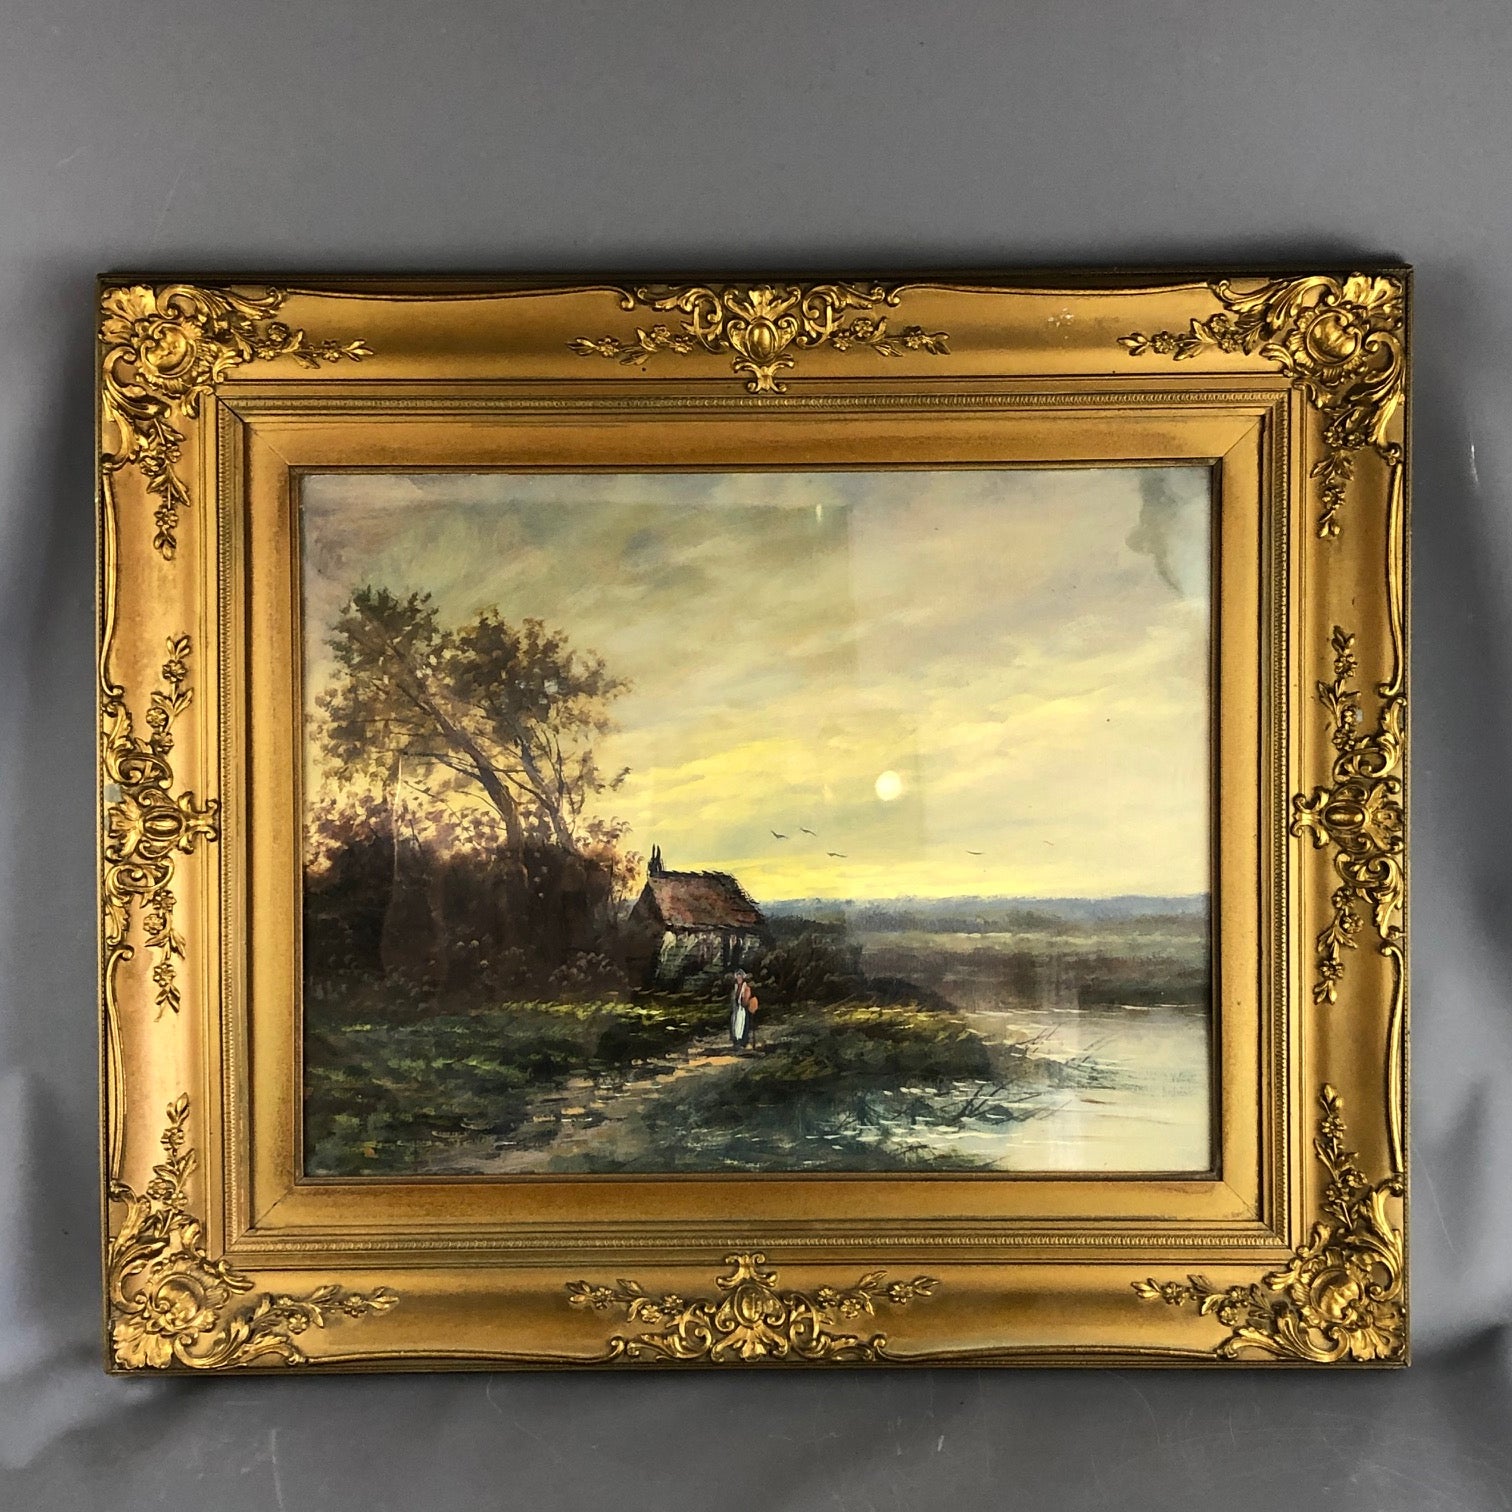 Oil-on-Canvas-Framed-Painting-Peaceful-Walk-by-the-Lake-or-Sea-Victorian-Antique-c1900